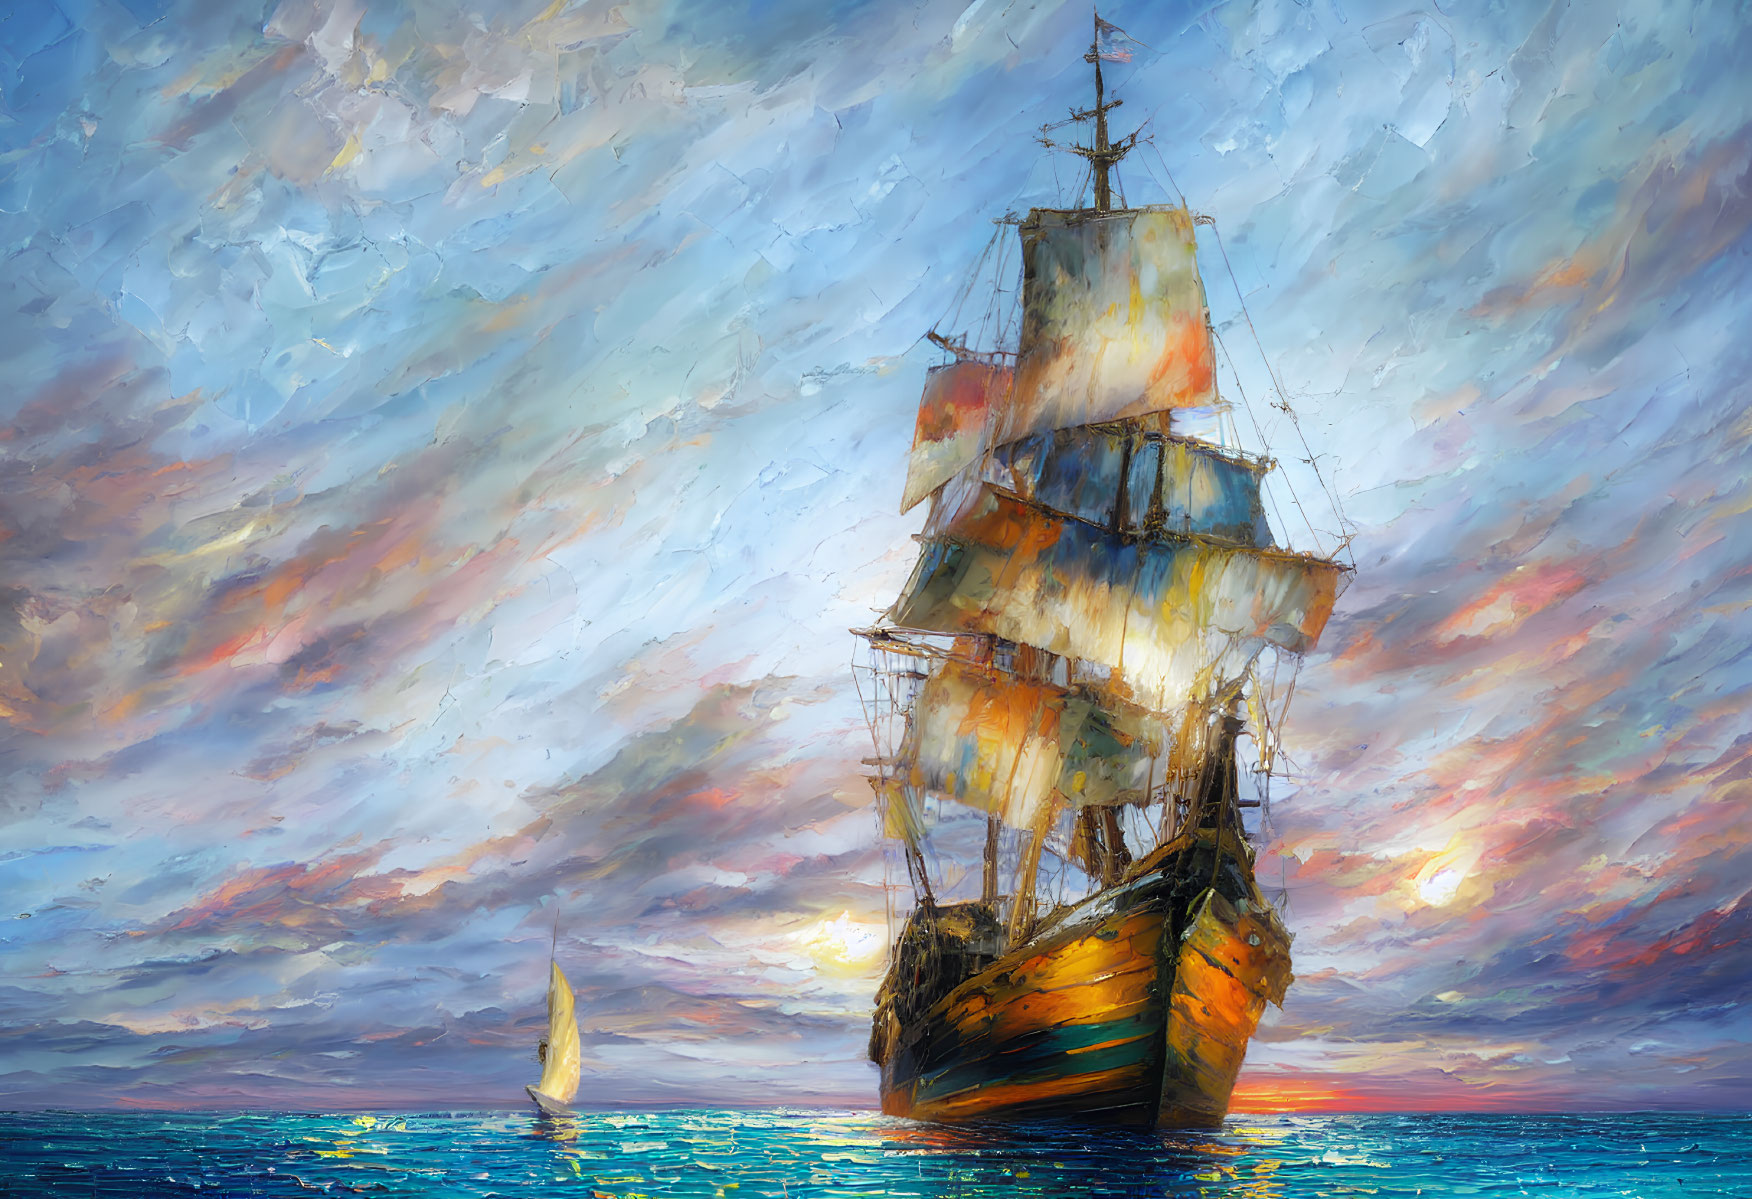 Majestic sailing ship on tranquil blue waters at sunset